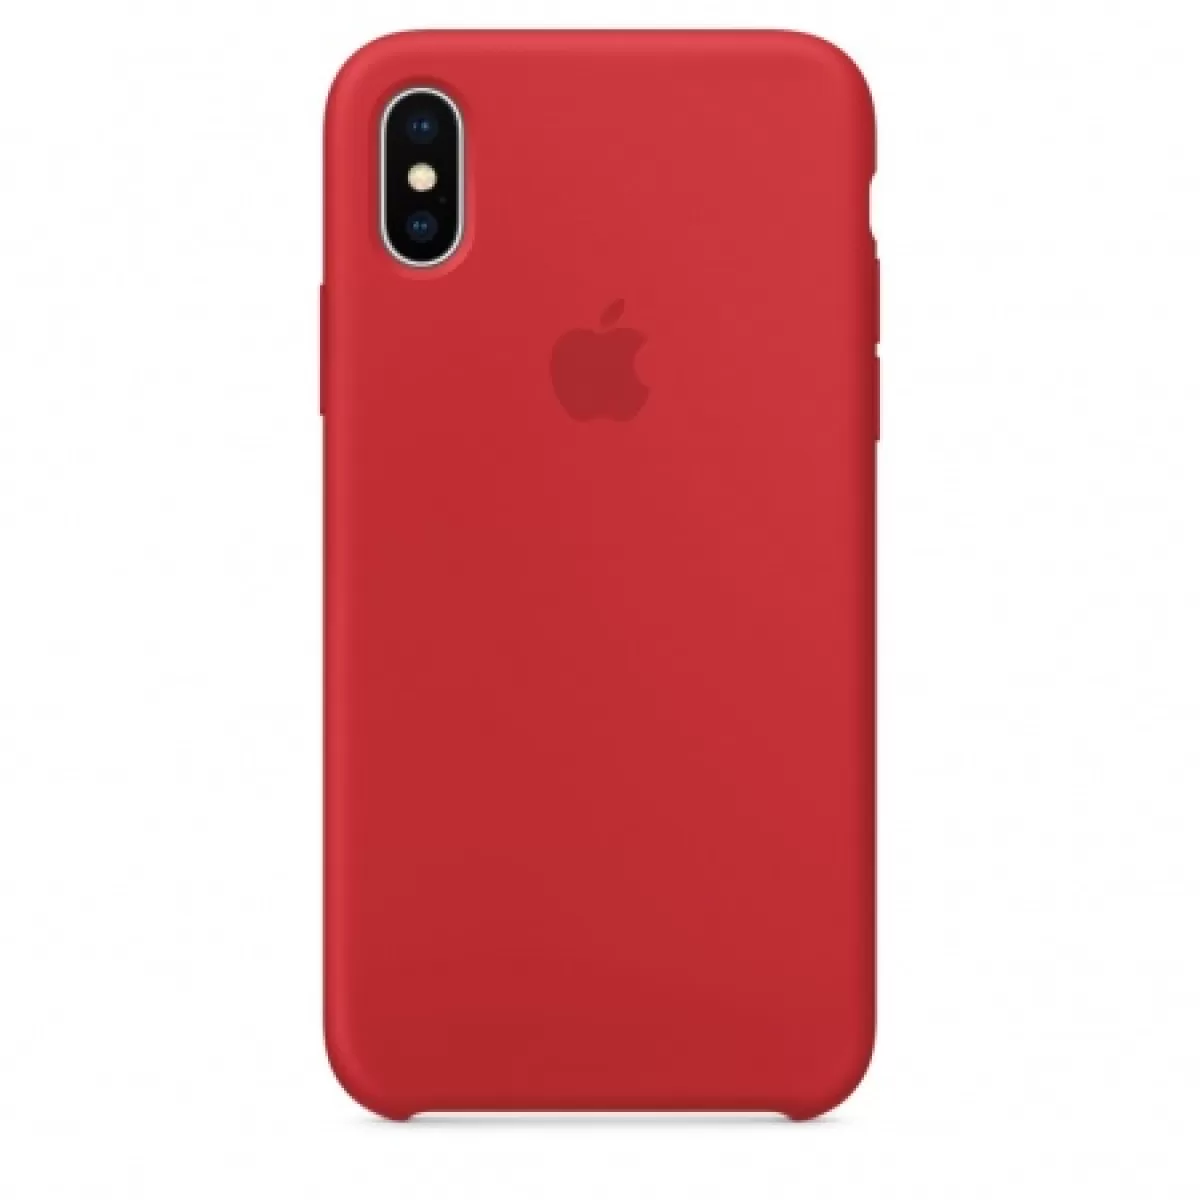 Apple iPhone X Silicone Case (PRODUCT) RED